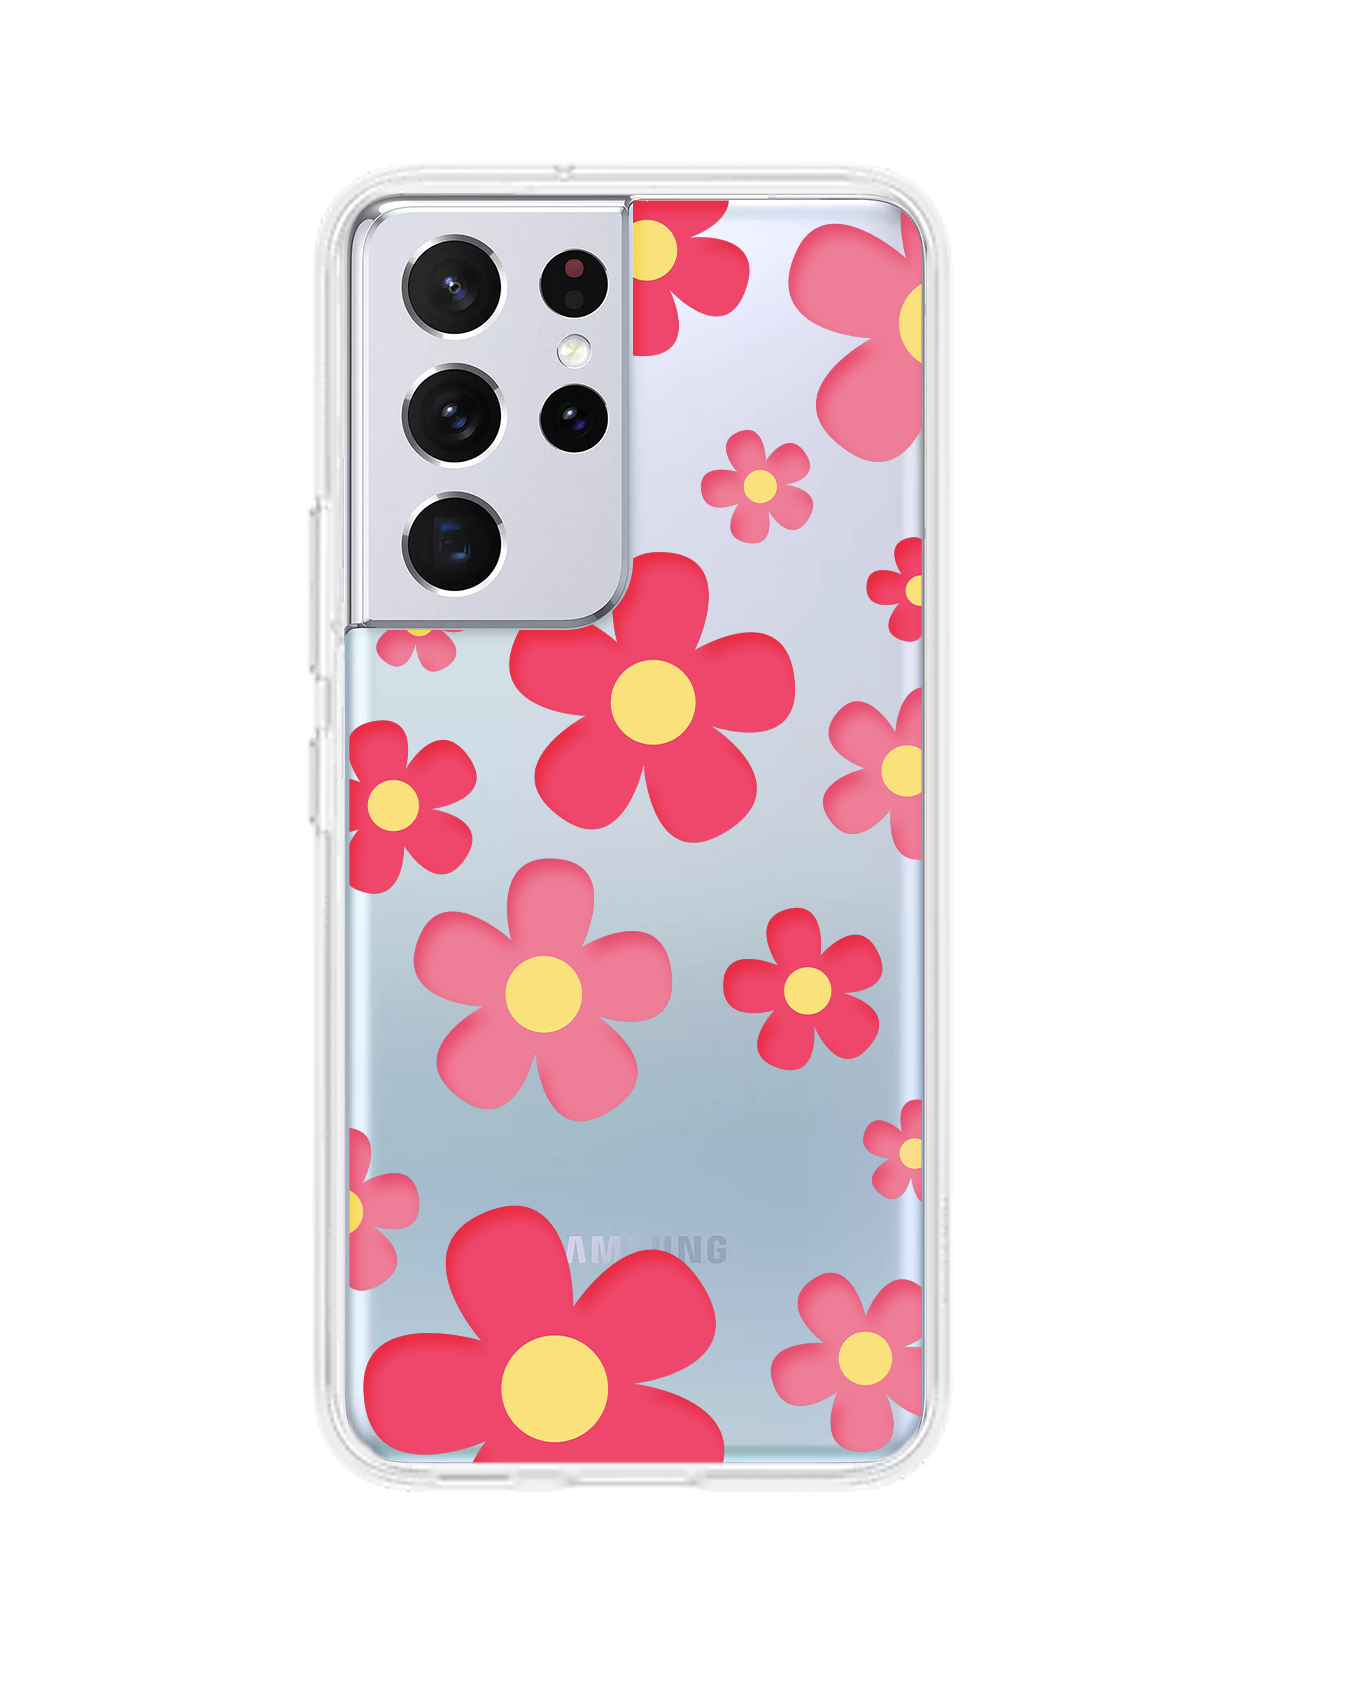 Android Rearguard Hybrid Case - Daisy Blush